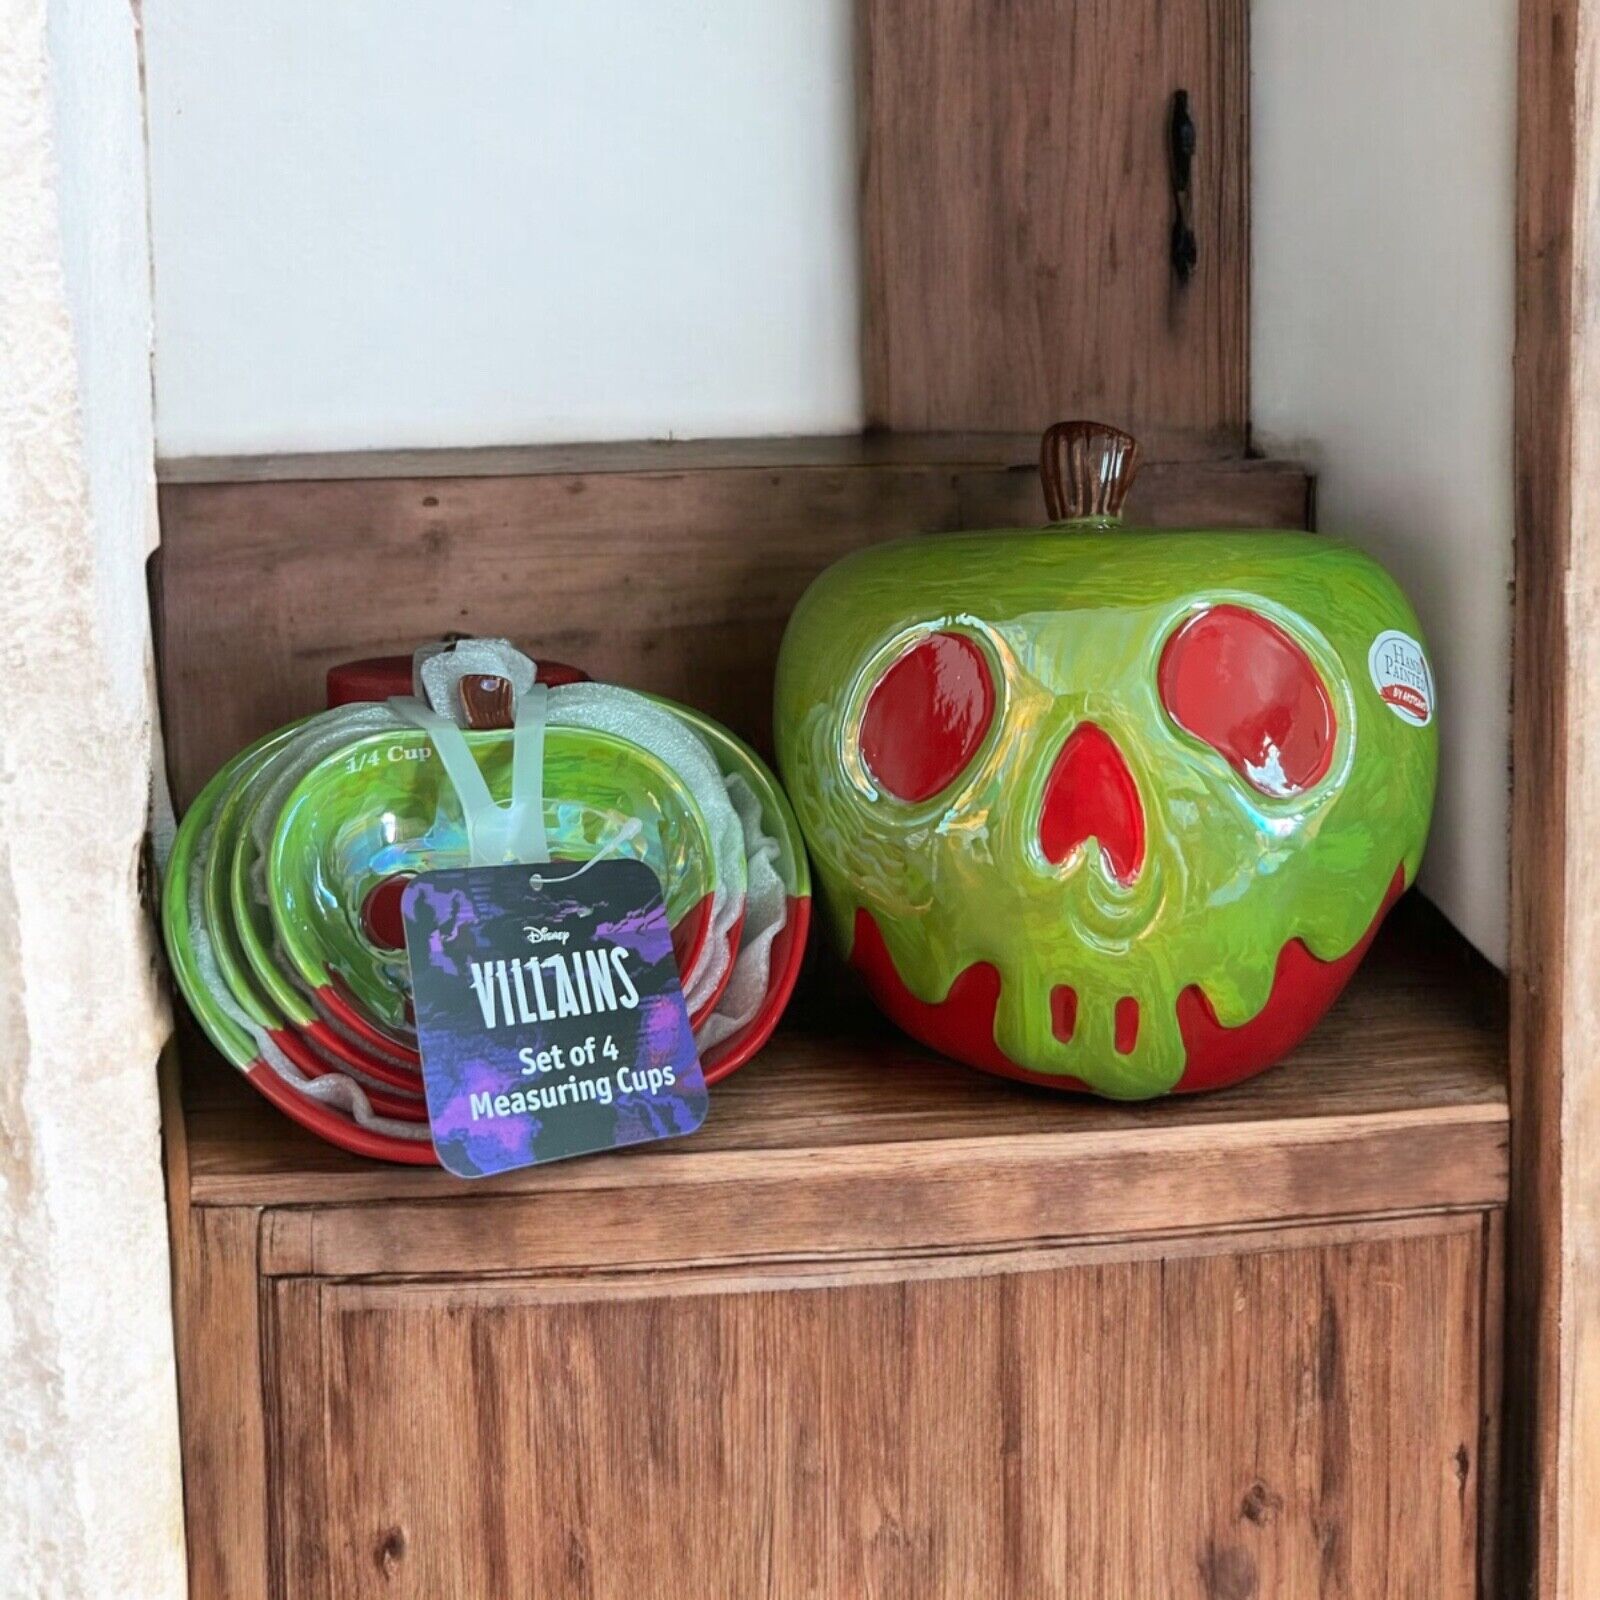 🍎NEW Disney Villains Poison Apple Canister & Matching Measuring Cups🍎